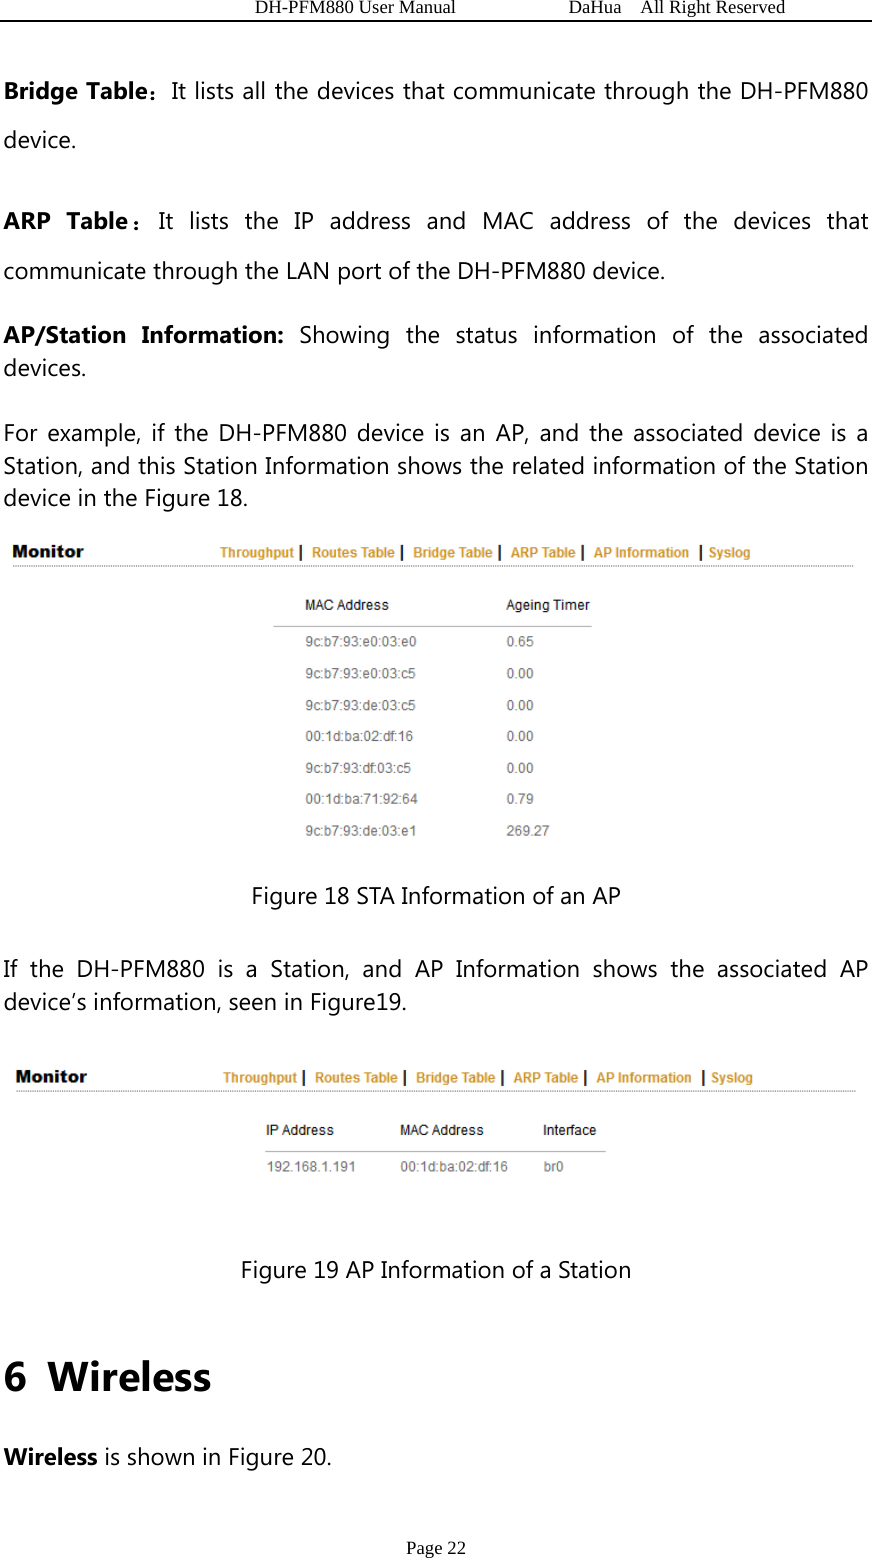   DH-PFM880 User Manual            DaHua  All Right Reserved Page 22 Bridge Table：It lists all the devices that communicate through the DH-PFM880 device. ARP Table ：It lists the IP address and MAC address of the devices that communicate through the LAN port of the DH-PFM880 device. AP/Station Information: Showing the status information of the associated devices. For example, if the DH-PFM880 device is an AP, and the associated device is a Station, and this Station Information shows the related information of the Station device in the Figure 18.  Figure 18 STA Information of an AP If the DH-PFM880 is a Station, and AP Information shows the associated AP device’s information, seen in Figure19.  Figure 19 AP Information of a Station  6 Wireless Wireless is shown in Figure 20. 